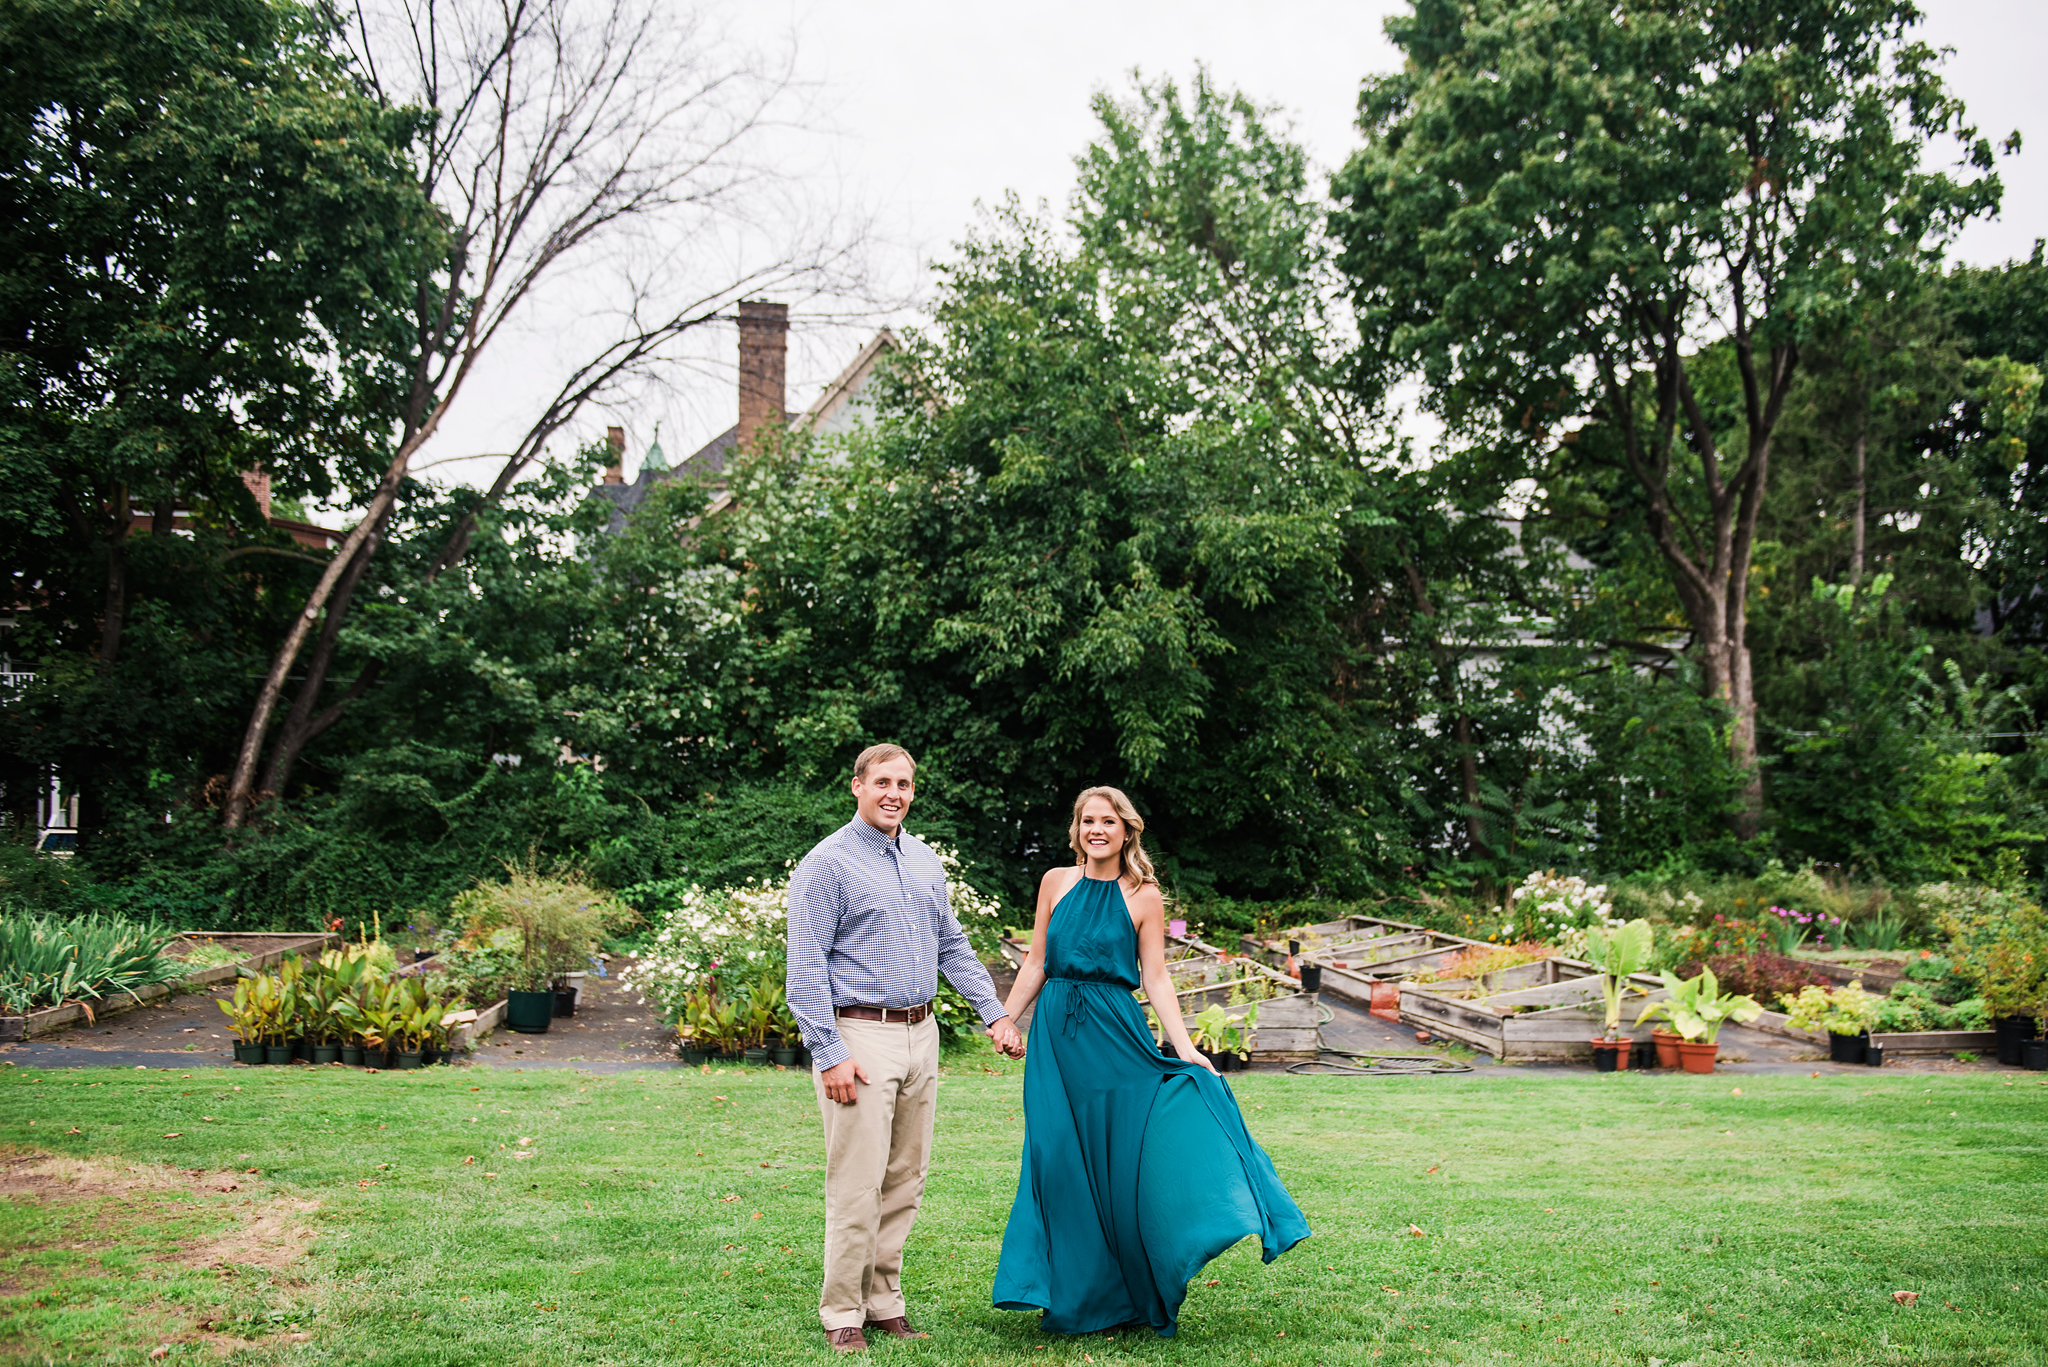 George_Eastman_House_Rochester_Yacht_Club_Rochester_Engagement_Session_JILL_STUDIO_Rochester_NY_Photographer_DSC_8137.jpg